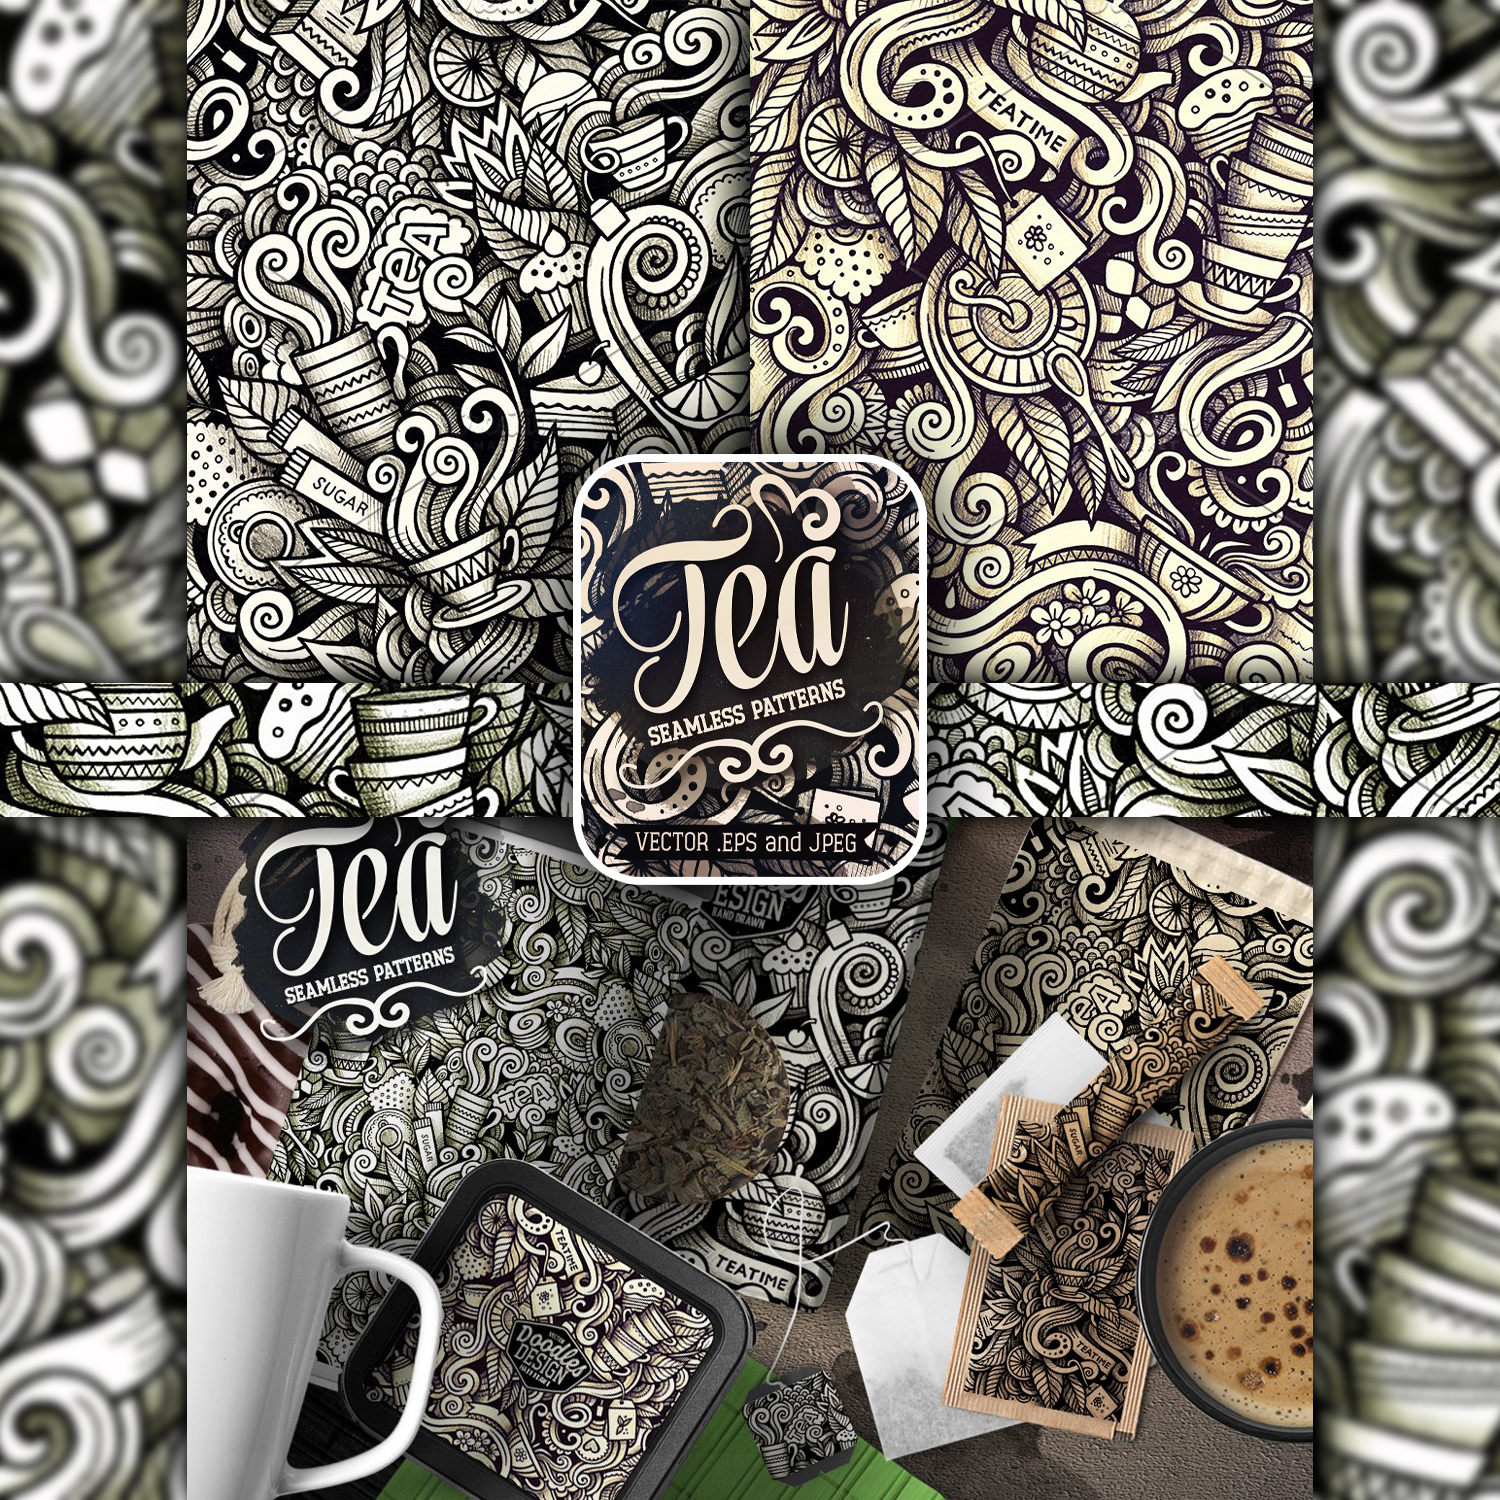 Preview of a product with a tea theme print.